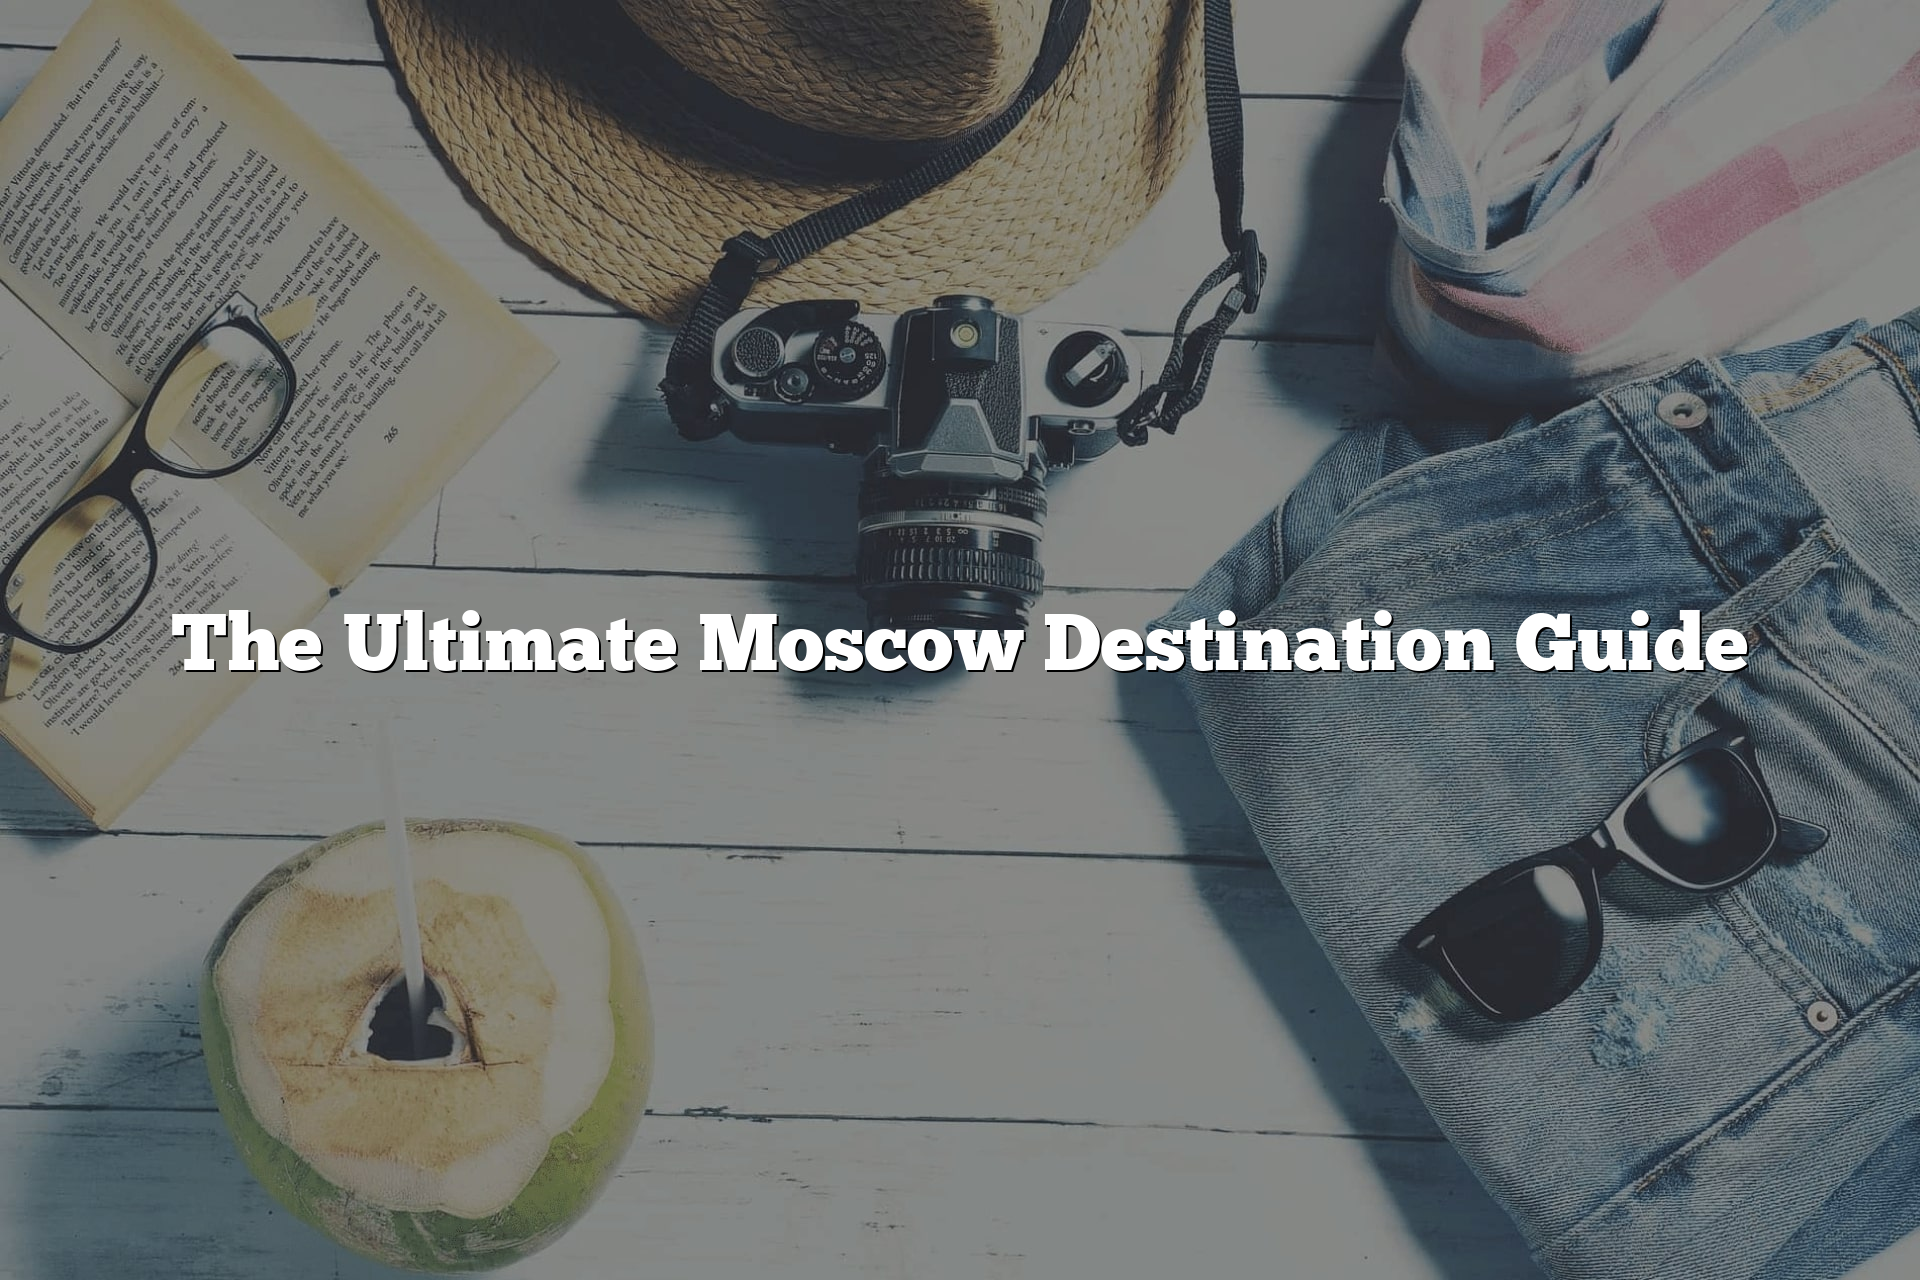 The Ultimate Moscow Destination Guide